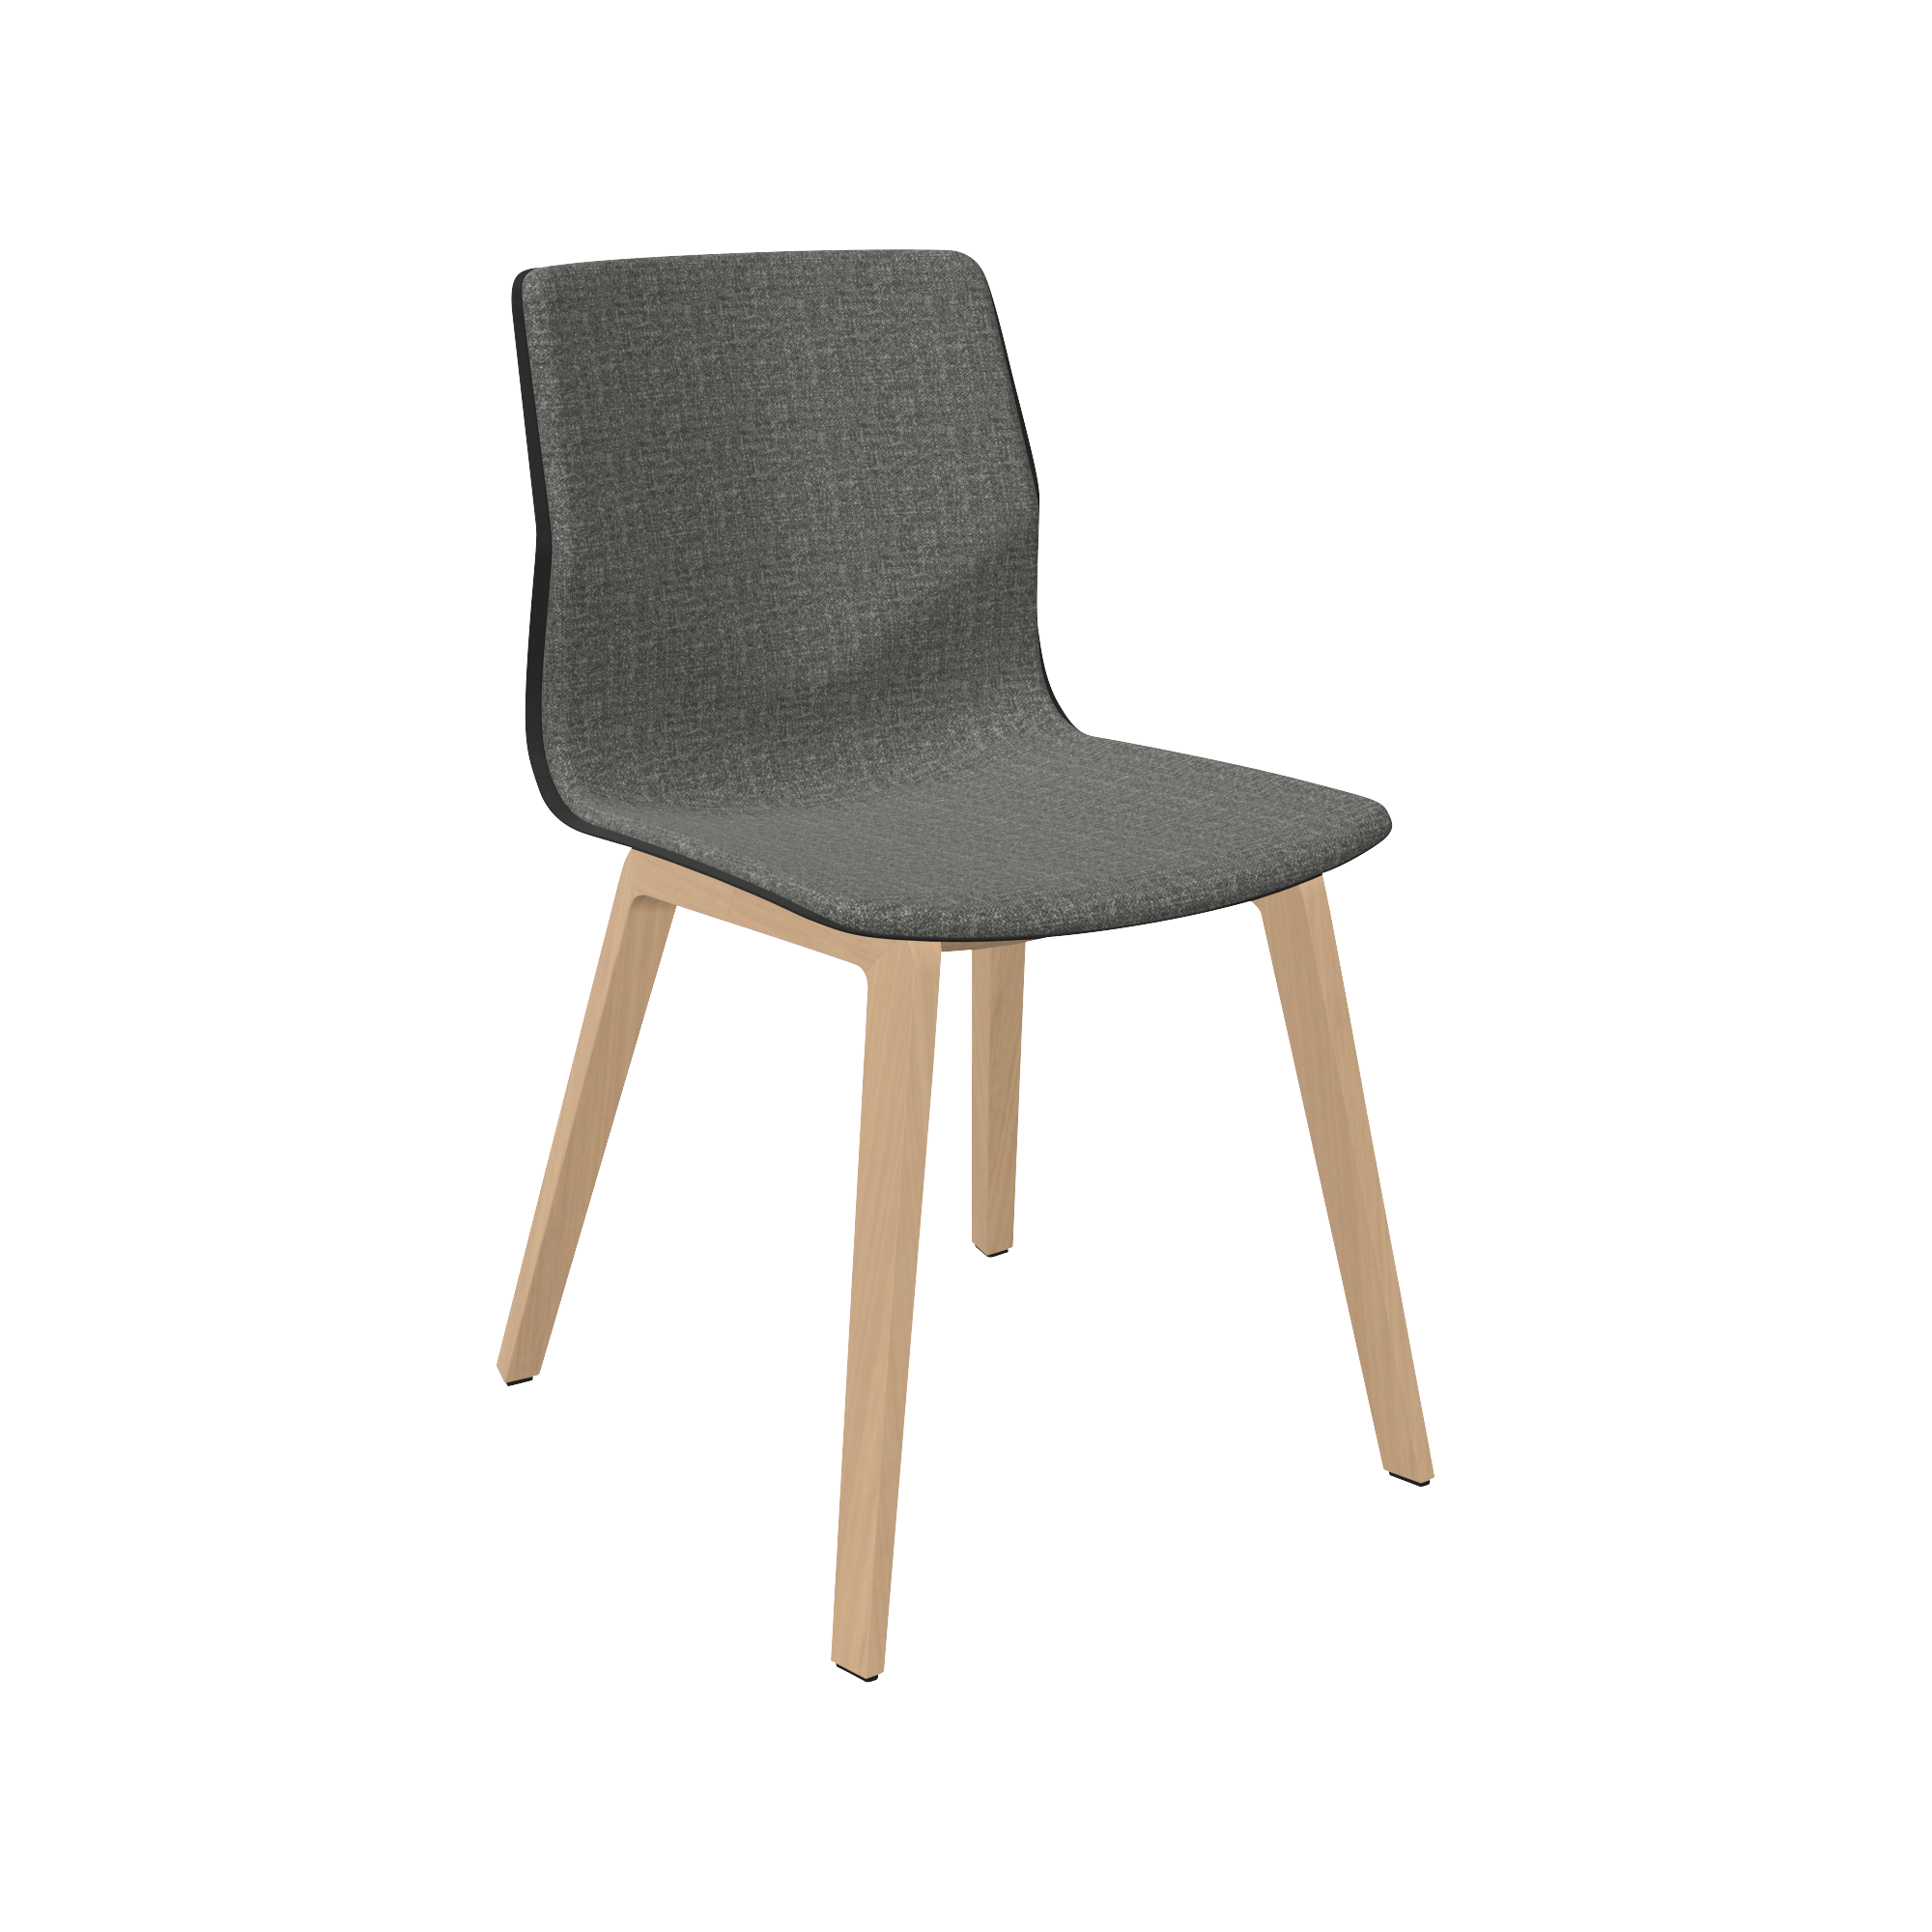 A grey designer desk chair with wooden legs